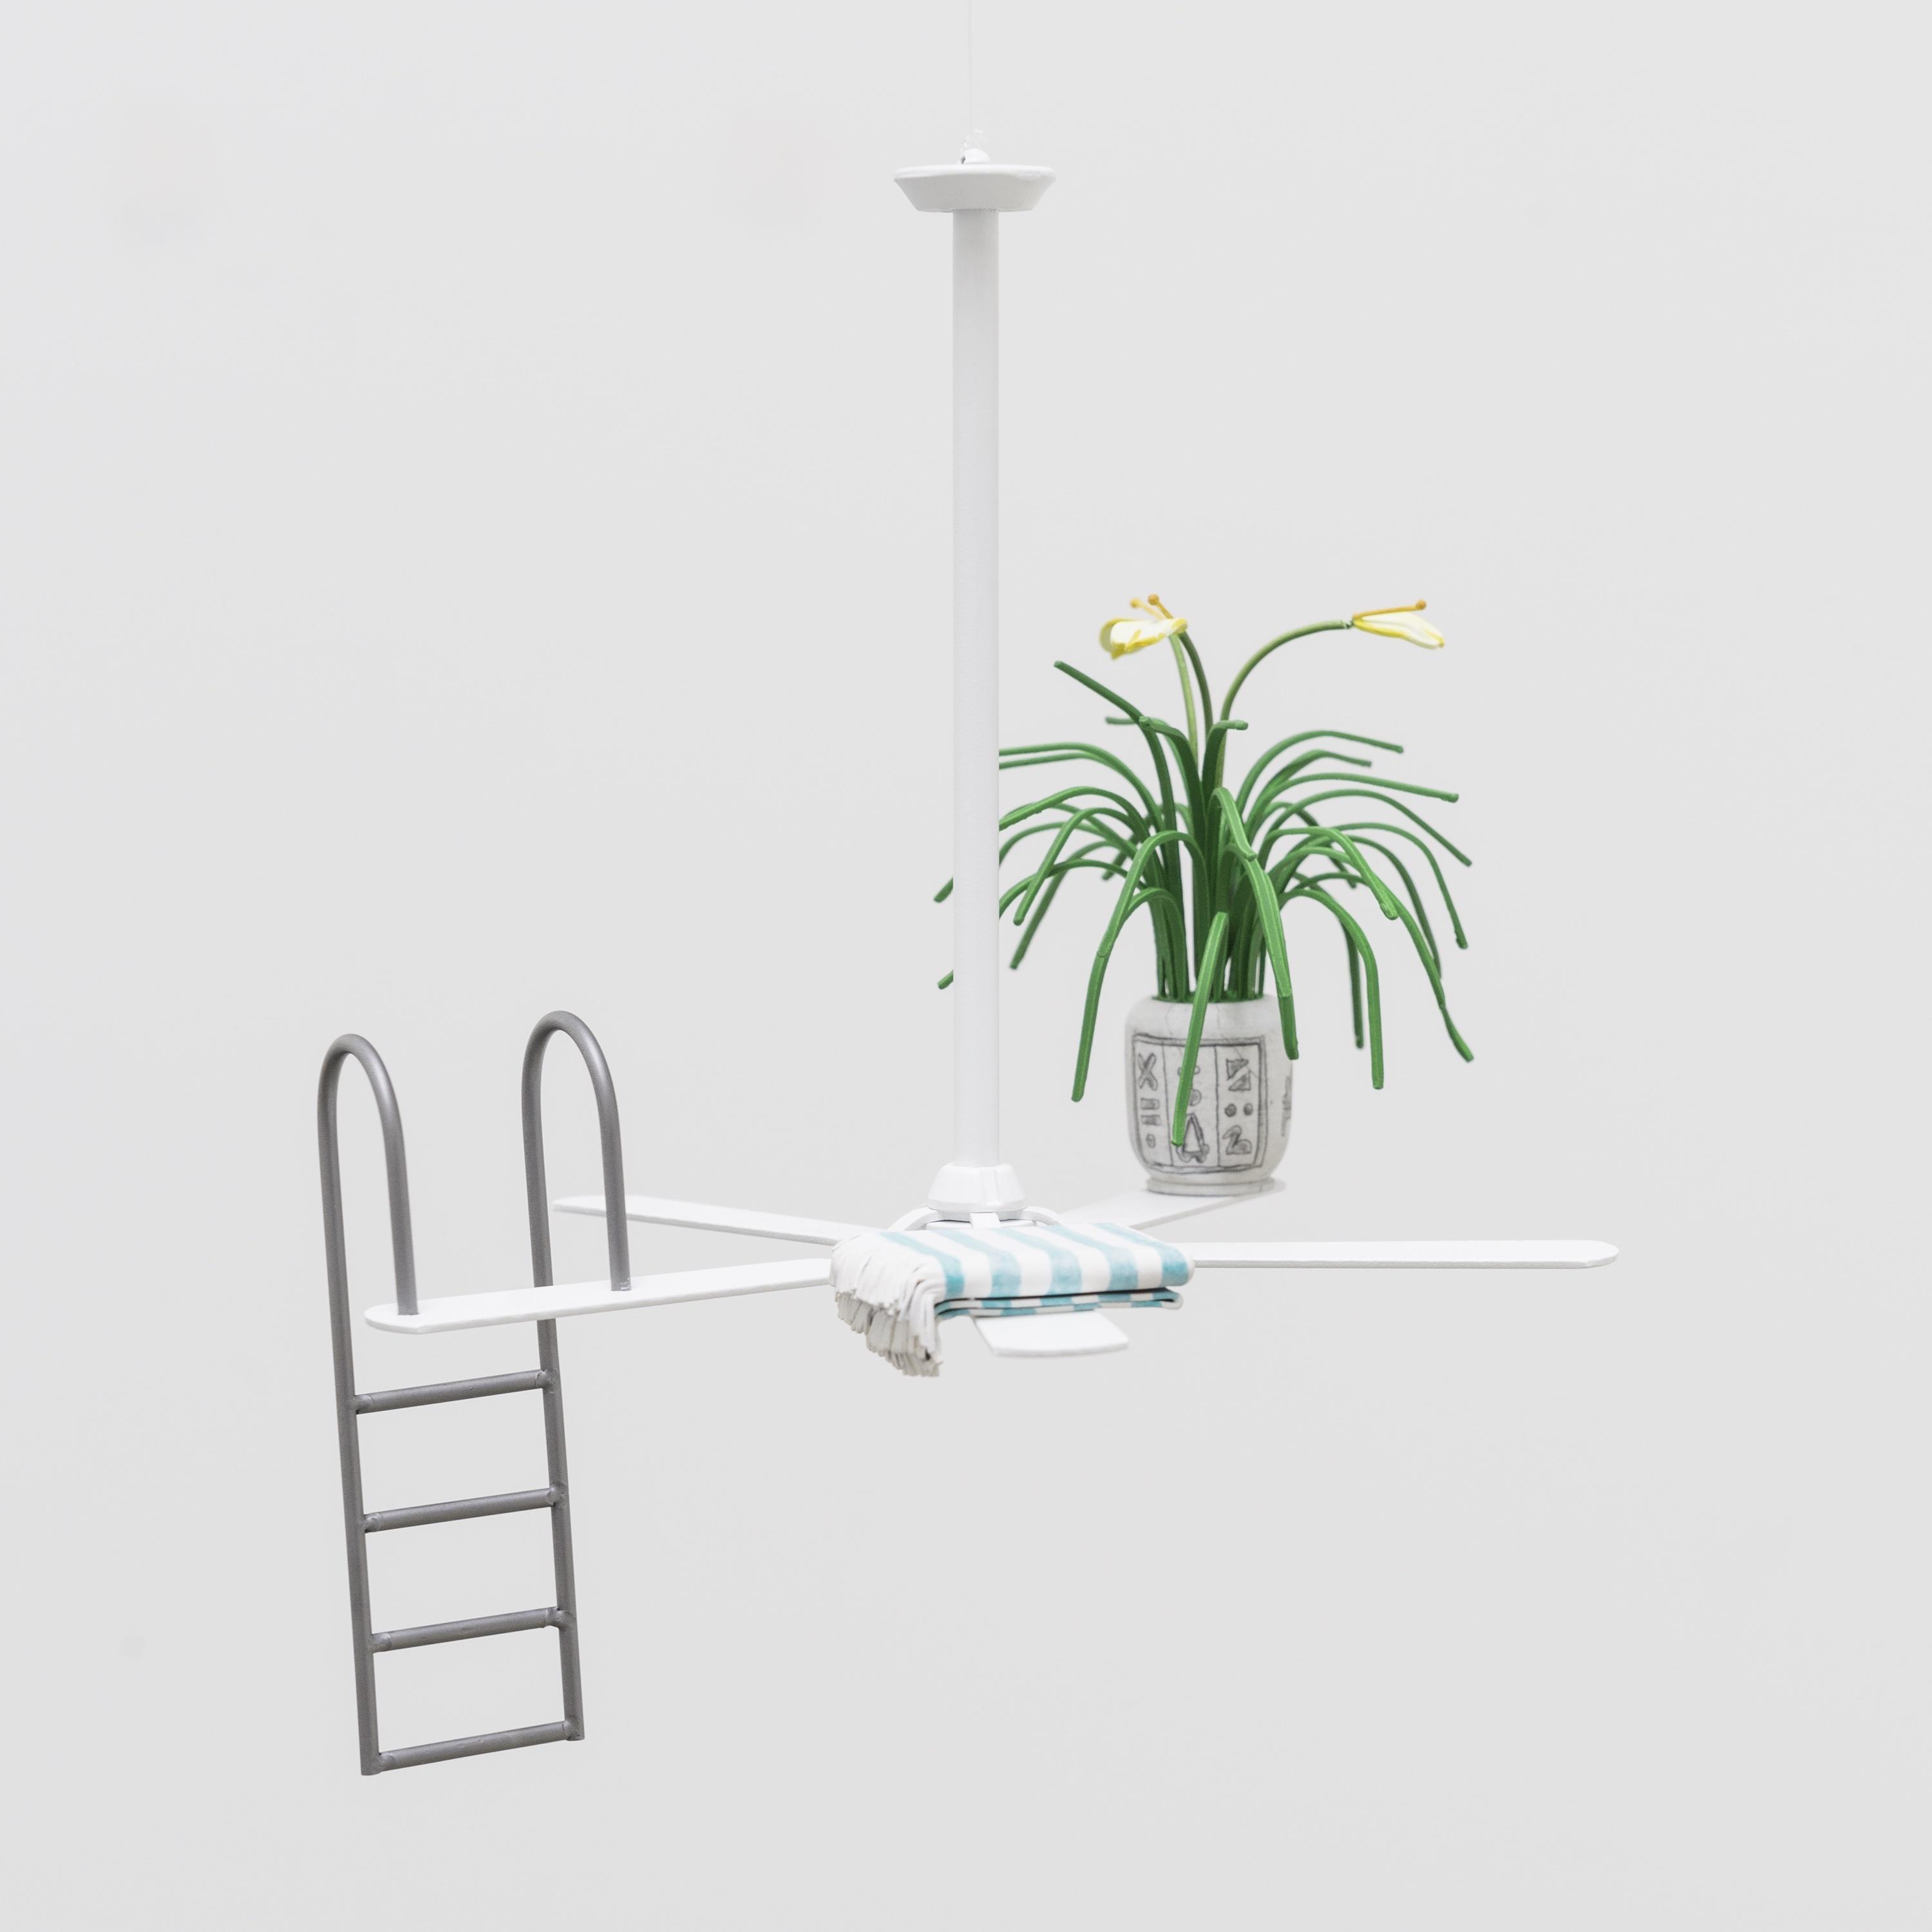 This is a miniature sculpture of a ceiling fan. On three of the fan blades sits three objects: a potted plant, a folded striped linen, and a pool ladder.